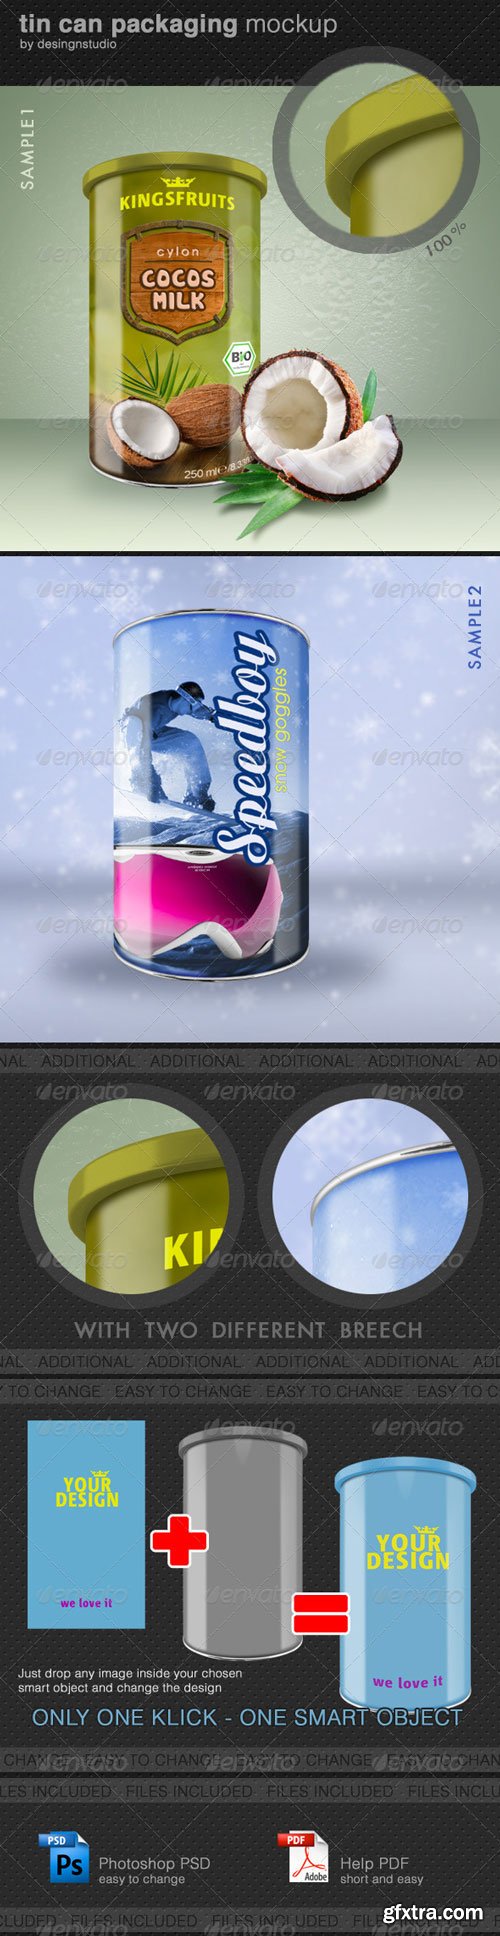 GraphicRiver - Tin Can Packaging Mock-Up 1965046